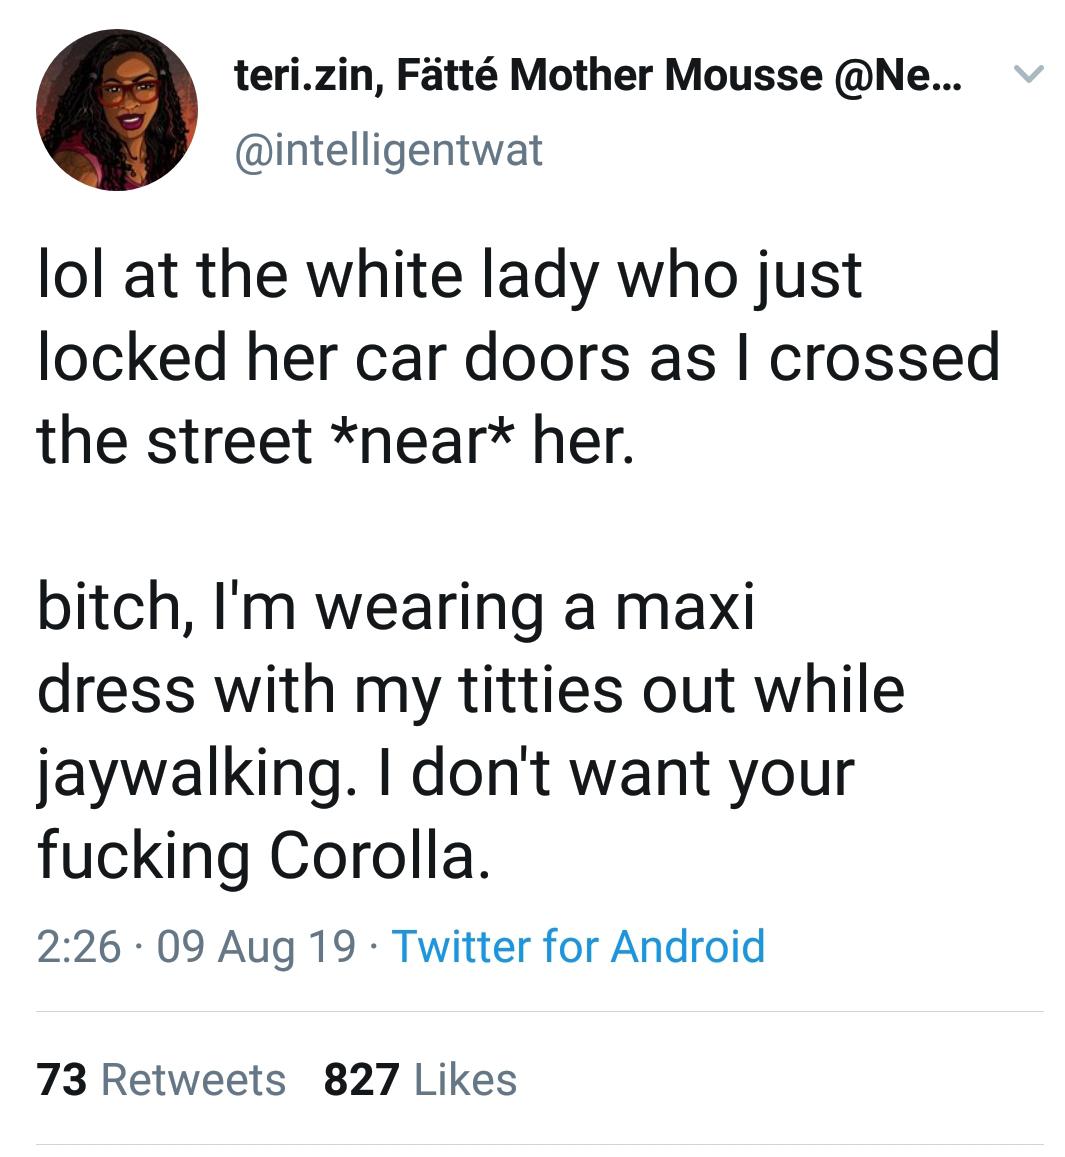 teri.zin, Ftt Mother Mousse ... v lol at the white lady who just locked her car doors as I crossed the street neart her. bitch, I'm wearing a maxi dress with my titties out while jaywalking. I don't want your fucking Corolla. 09 Aug 19. Twitter for Androi